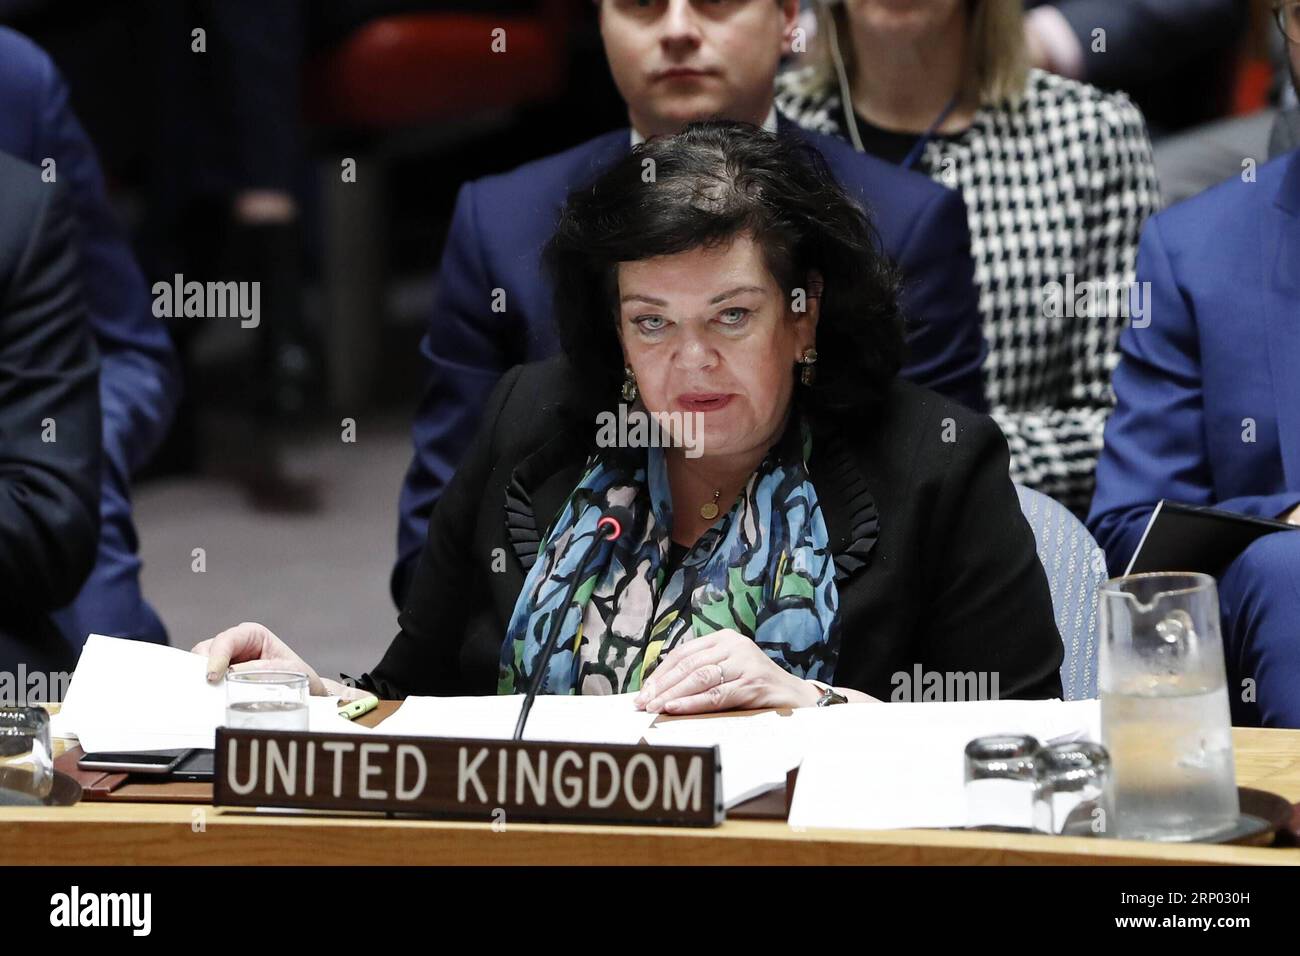 (180414) -- UNTIED NATIONS, April 14, 2018 -- British Ambassador to the United Nations Karen Pierce (Front) addresses a Security Council emergency meeting on Syria at the UN headquarters in New York, April 14, 2018. UN Security Council held an emergency meeting on Syria requested by Russia on Saturday. UN Secretary-General Antonio Guterres expressed concern over Friday s joint military action against Syria by the United States, France and Britain, and called for adherence to the UN Charter and international law on the issue. ) UN-SECURITY COUNCIL-SYRIA-EMERGENCY MEETING LixMuzi PUBLICATIONxNOT Stock Photo